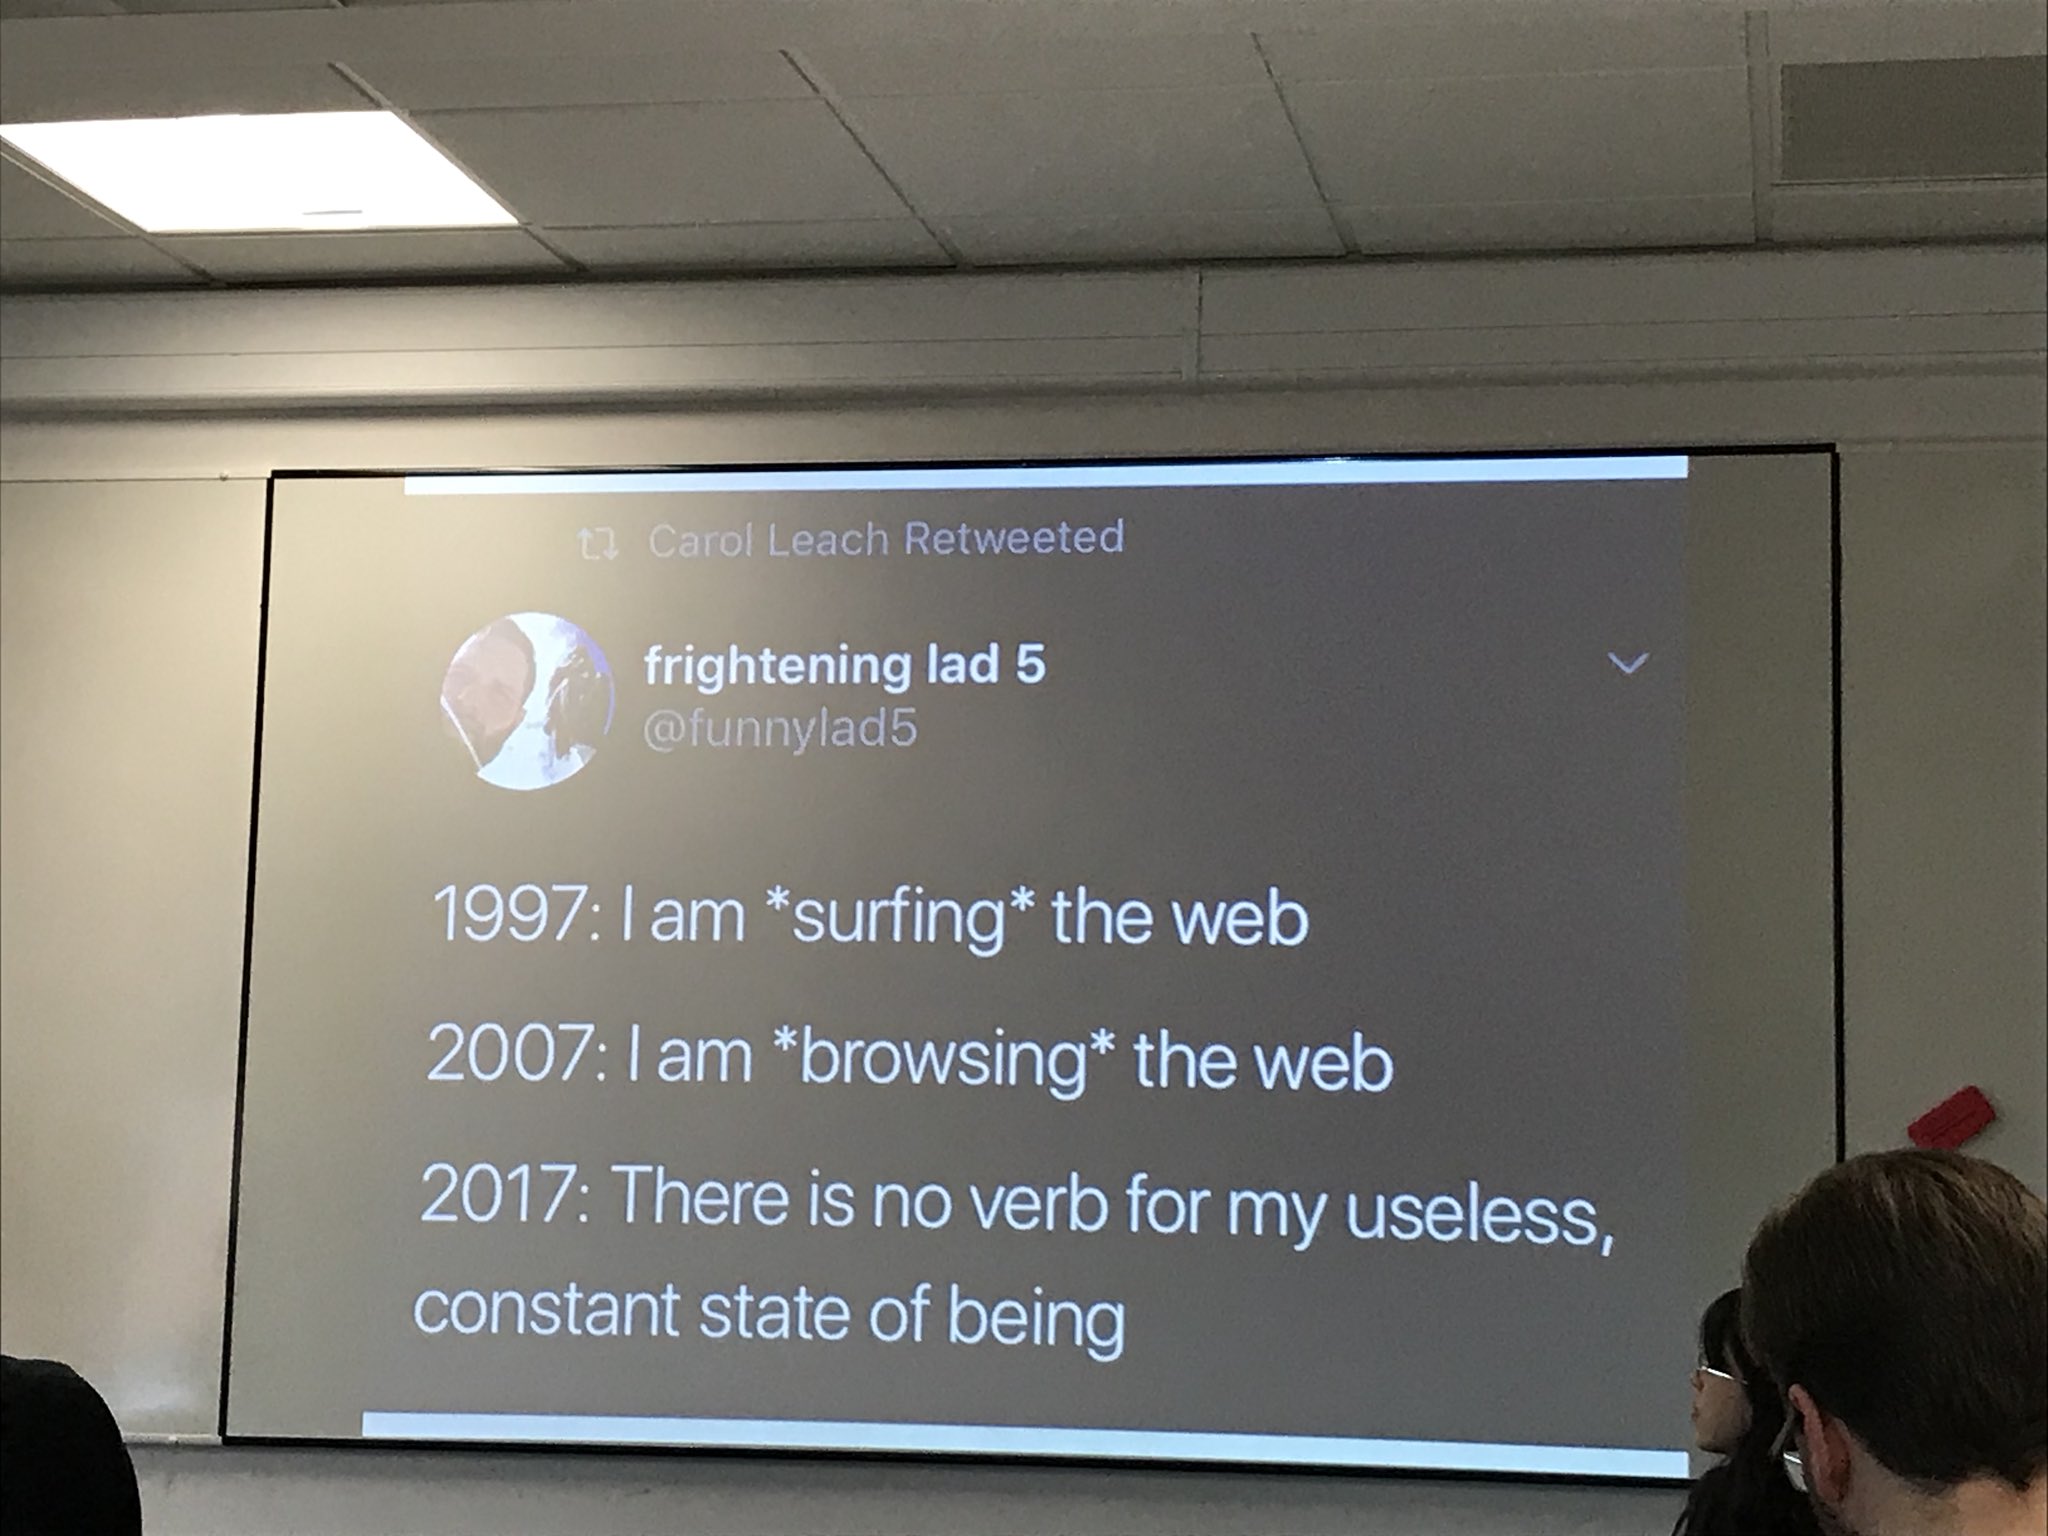 An amusing perspective on our evolving use of the web from @davidwebster #SocMedHE17 https://t.co/Tw2isGGksT